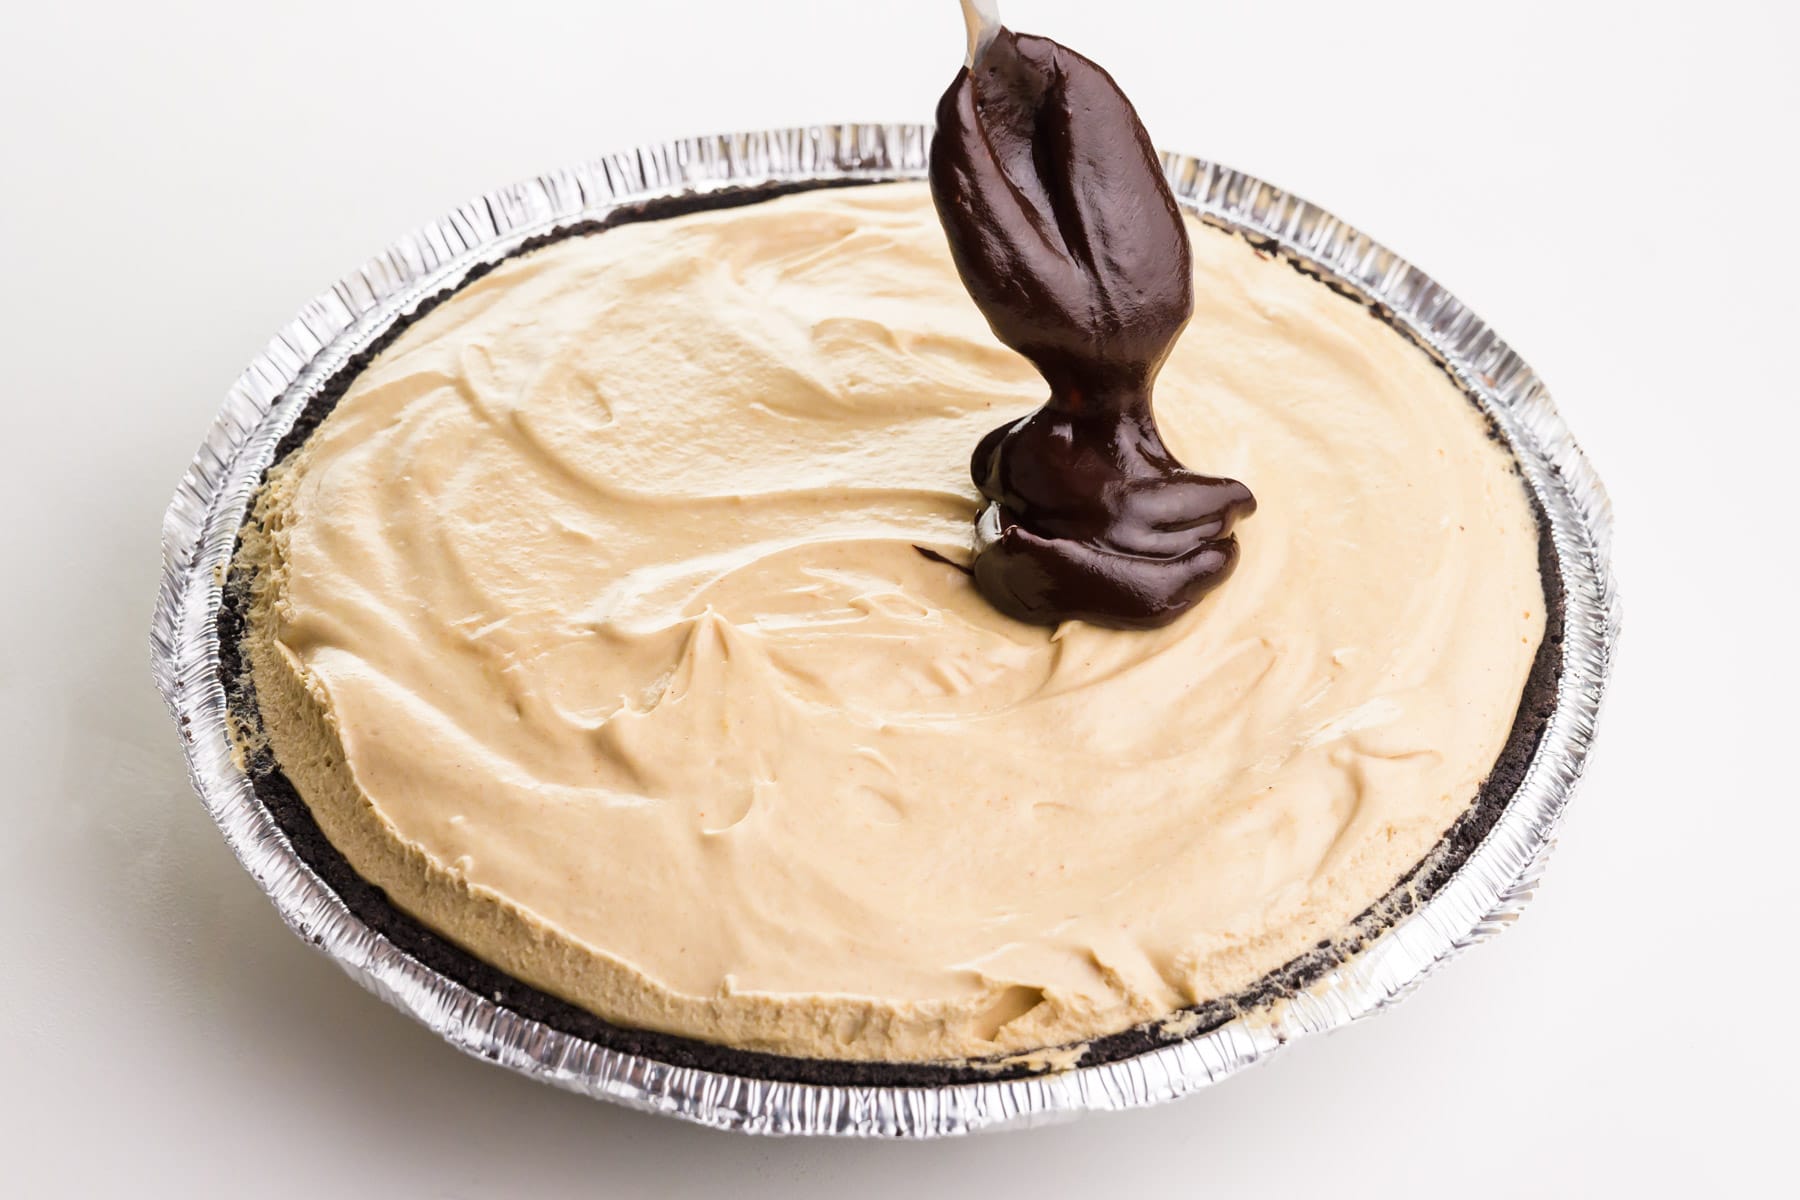 A spoonful of melted chocolate is being poured over a peanut butter pie.